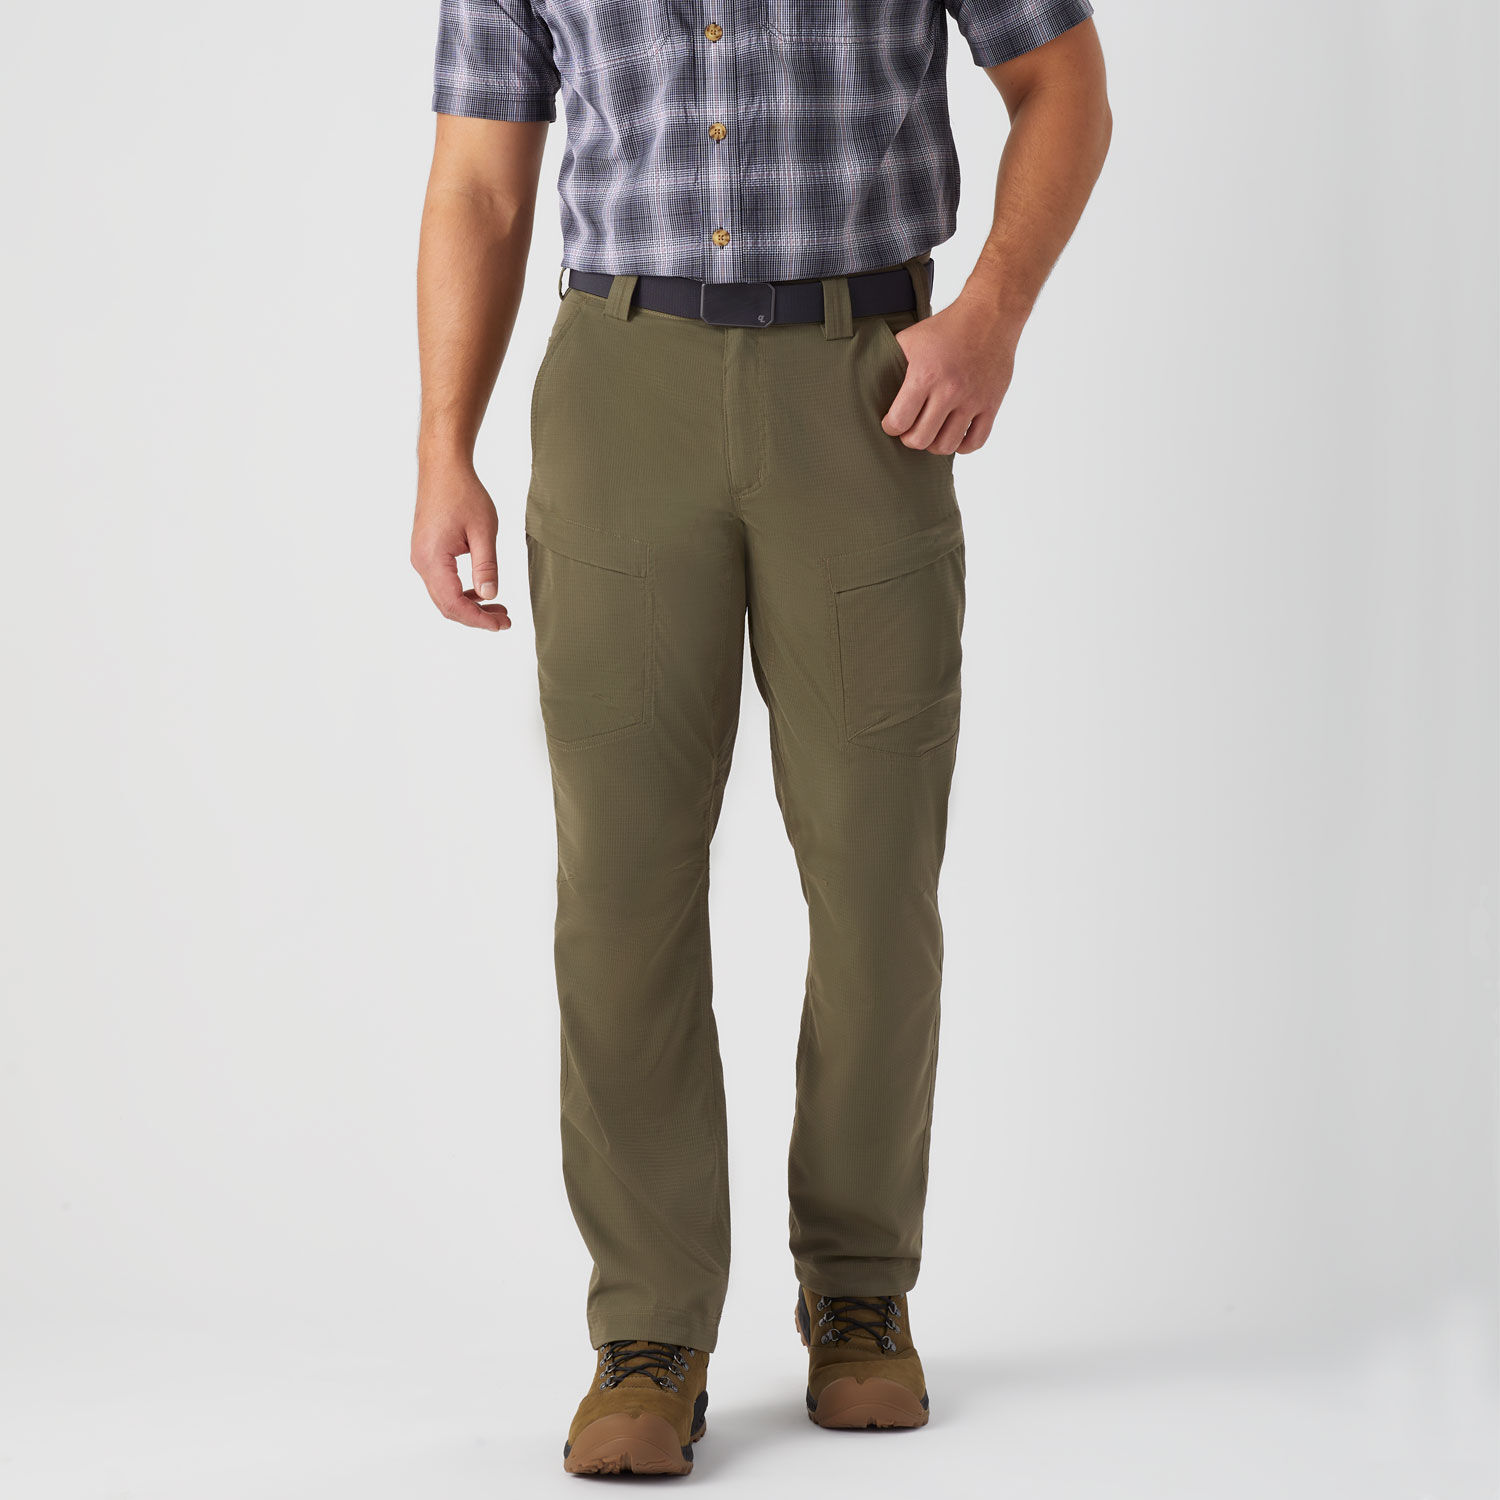 Men's Breezeshooter Standard Fit Work Pants | Duluth Trading Company